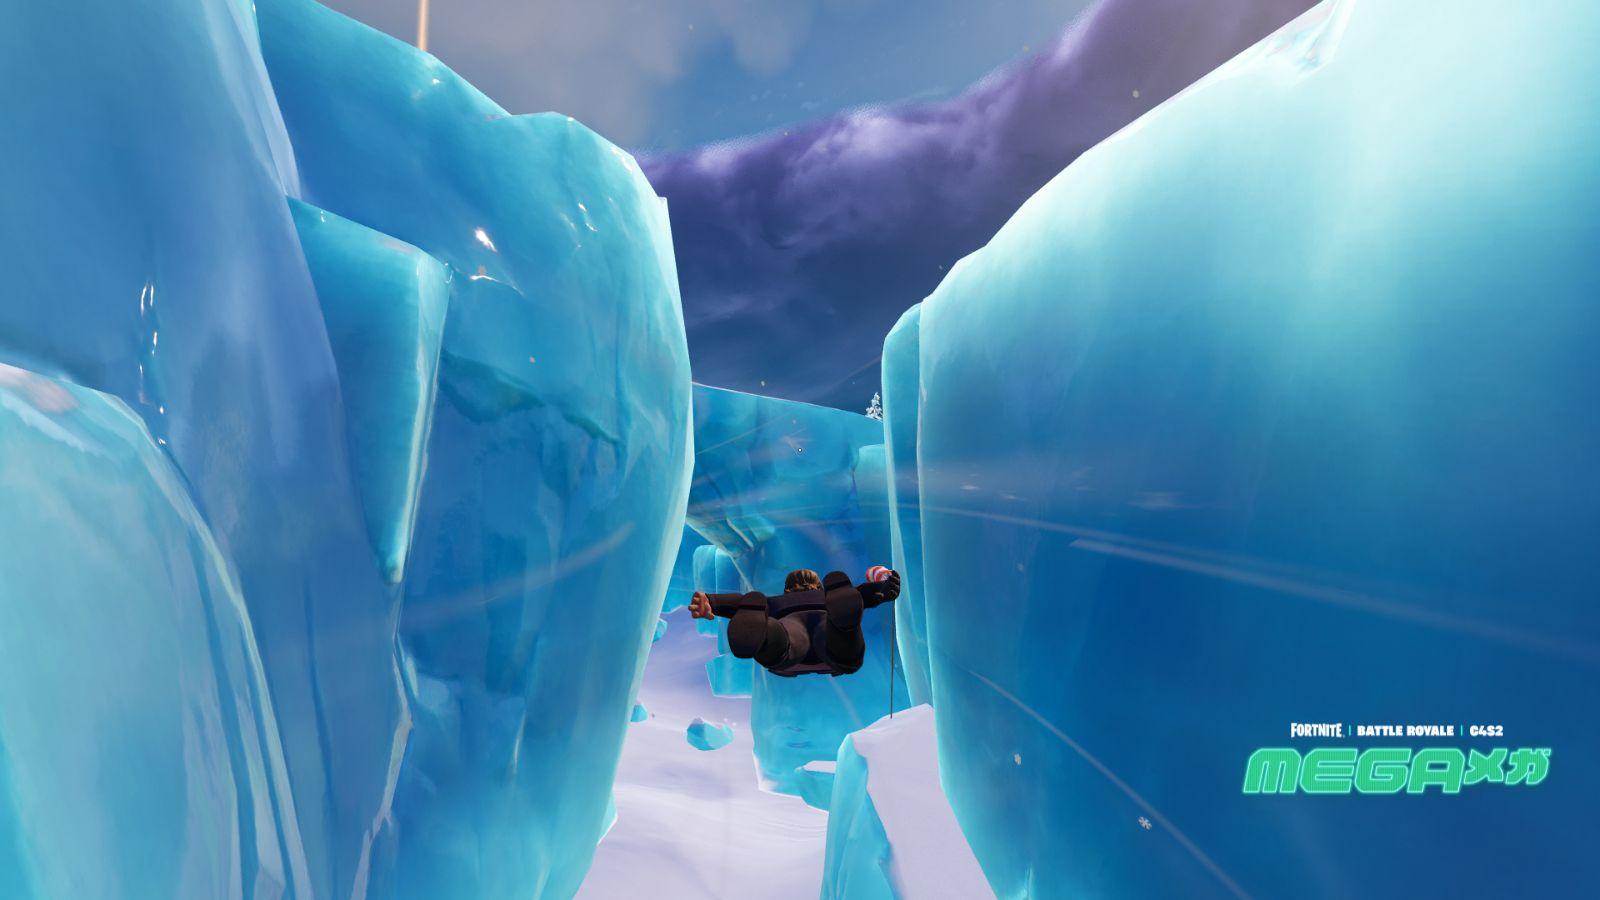 Player flying in a Wind Tunnel in Fortnite